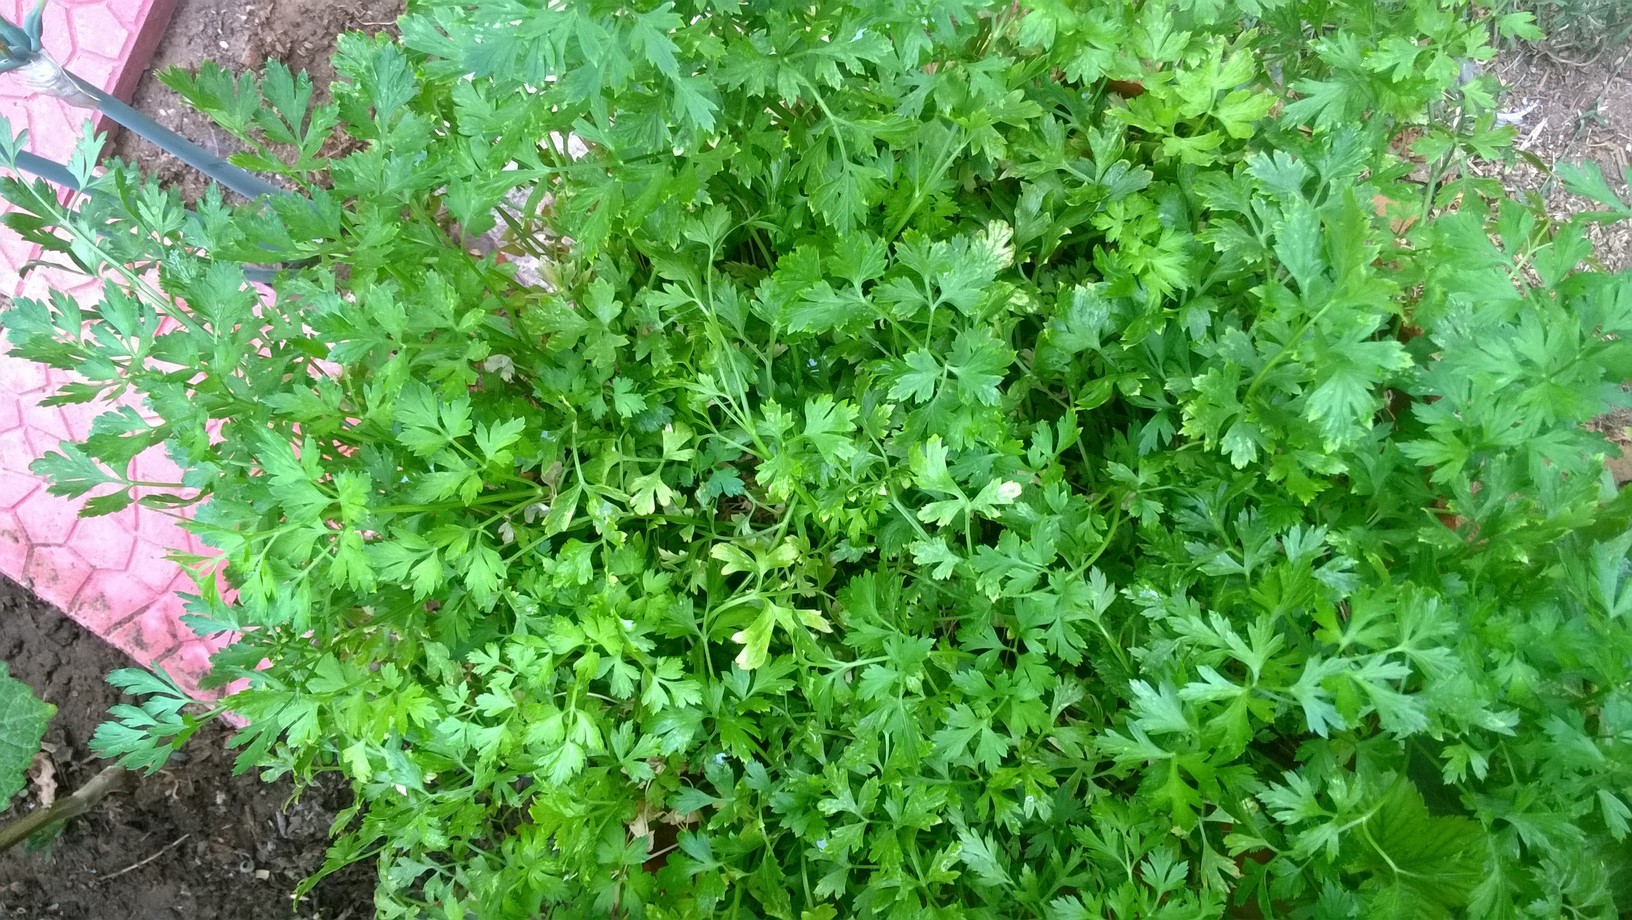 Parsley is a great choice for container planting, and one of the most used herbs in the kitchen.